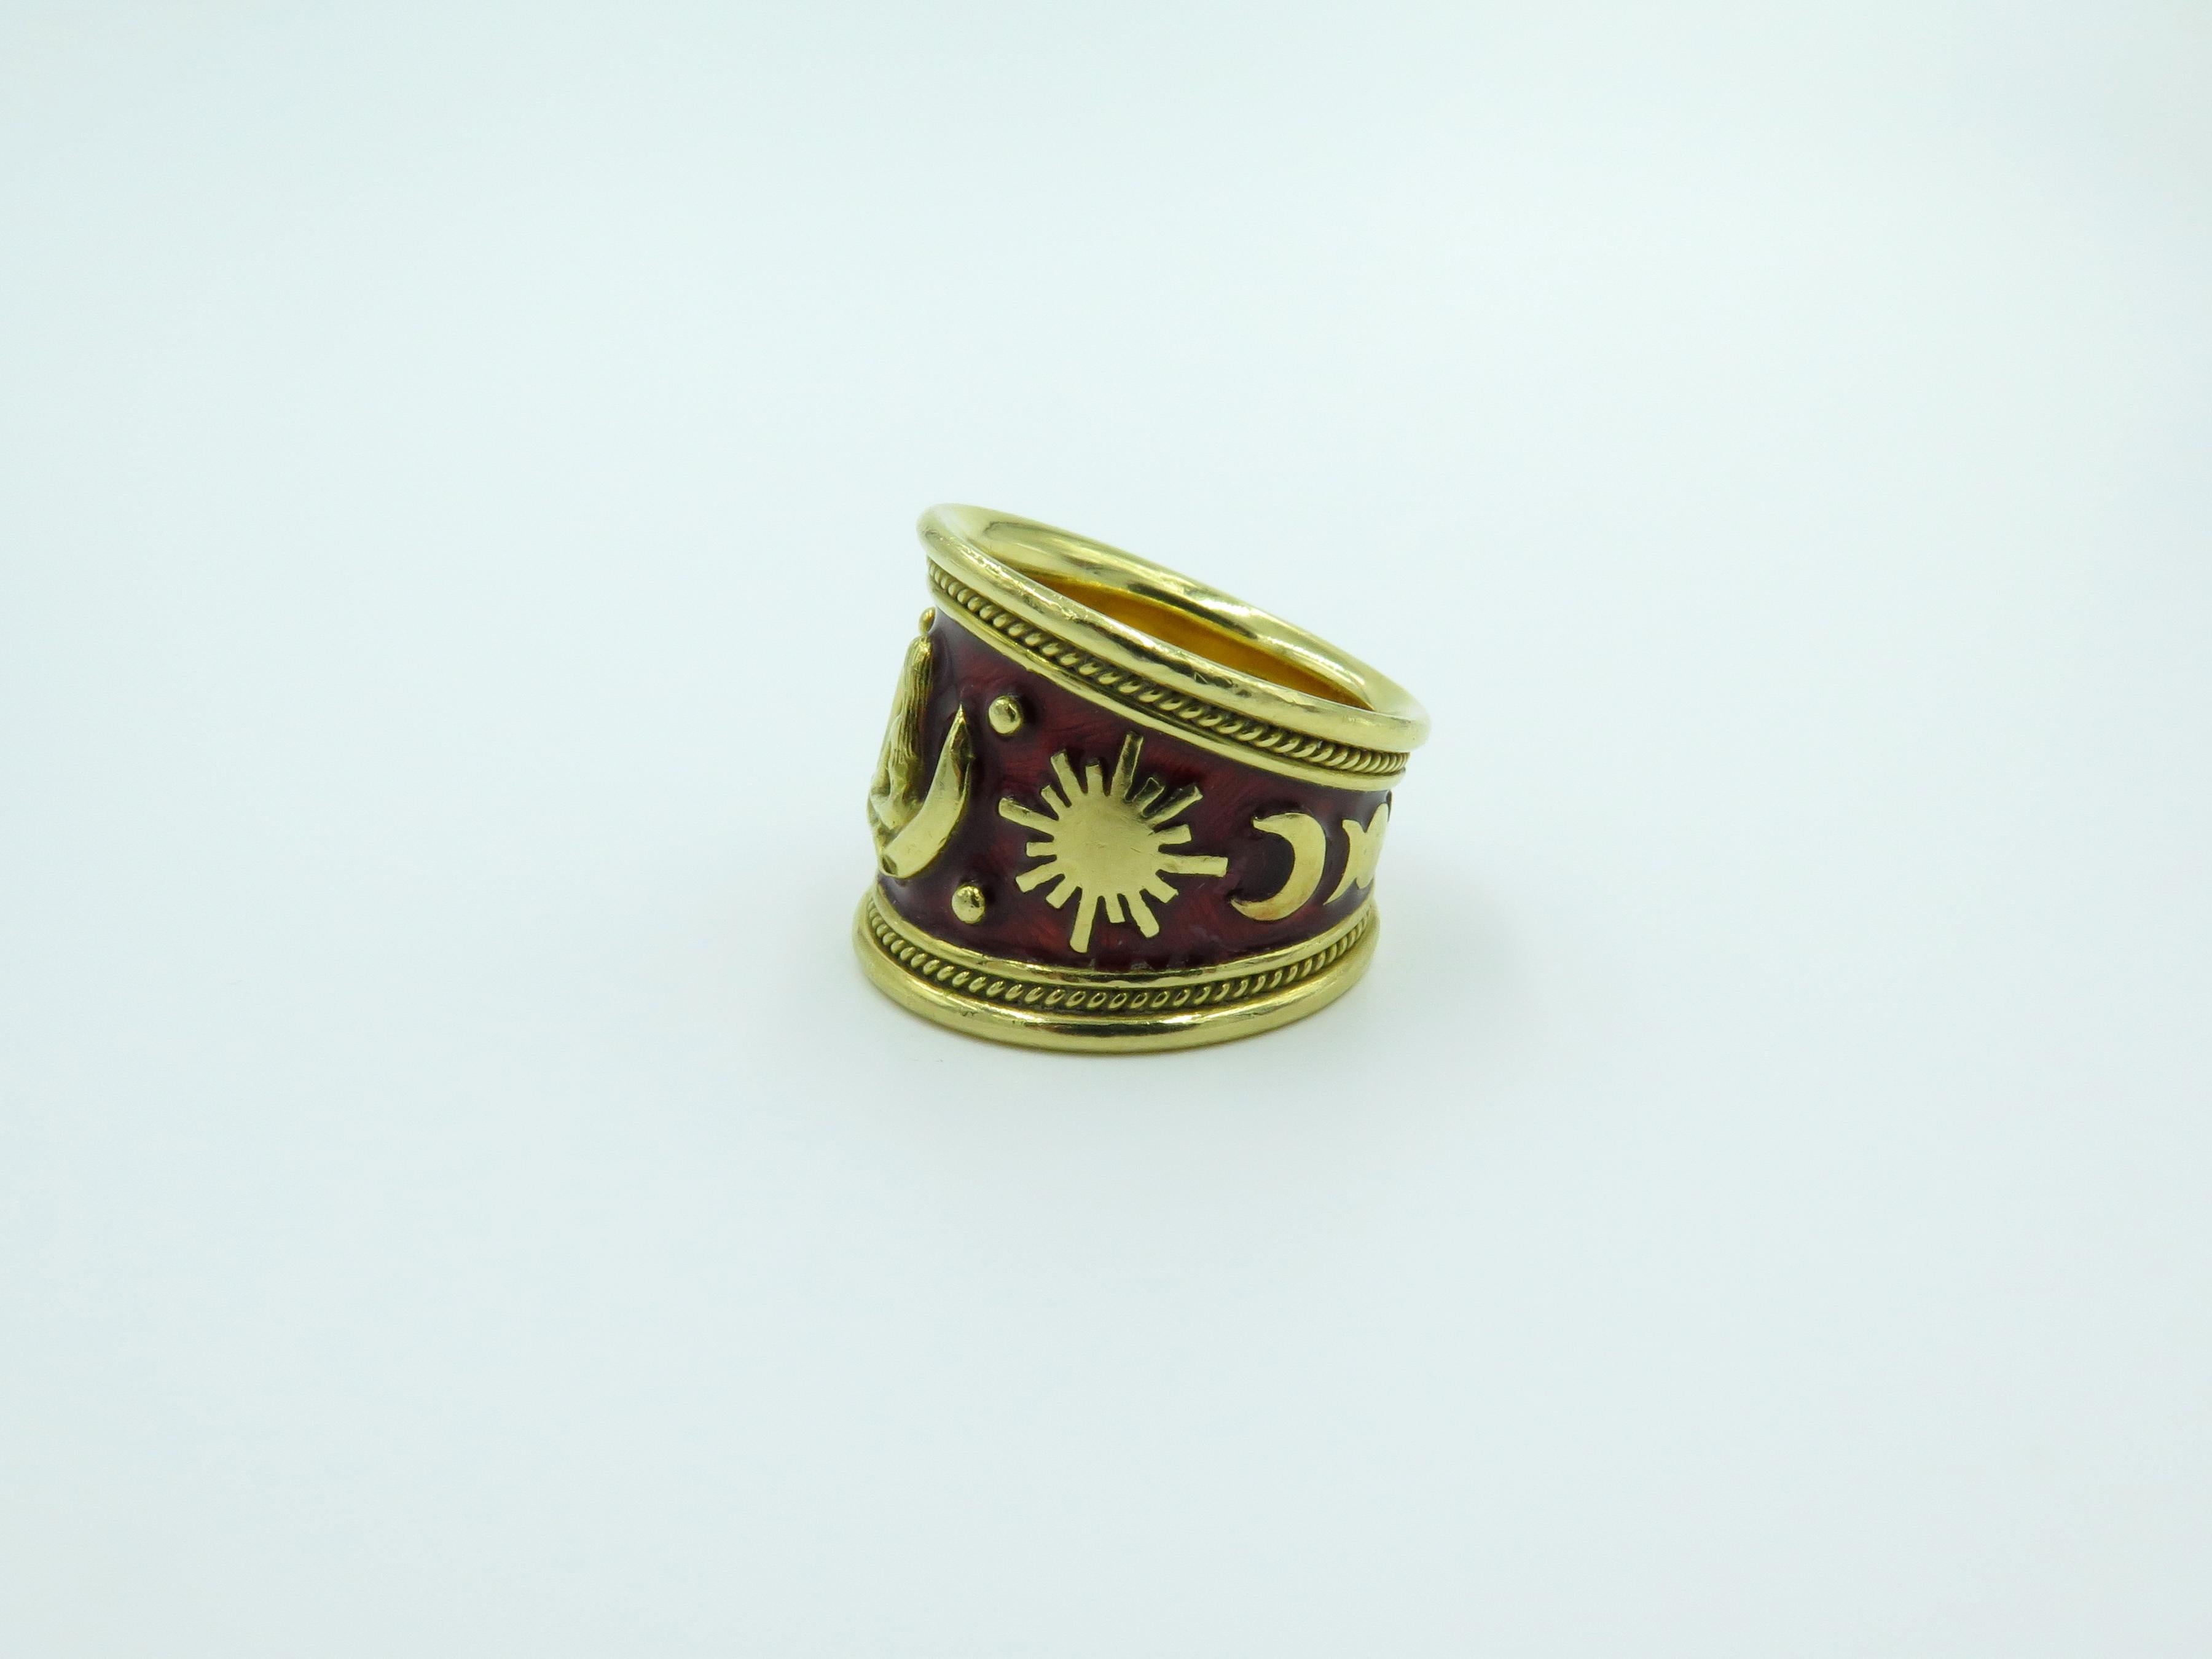 An 18 karat yellow gold and red enamel Virgo ring, from the Zodiac collection. Elizabeth Gage. The tapered red enamel band set with polished gold astrological symbols. Stamped Gage, with English assay mark and maker’s mark. Size 6 1/2. Gross weight